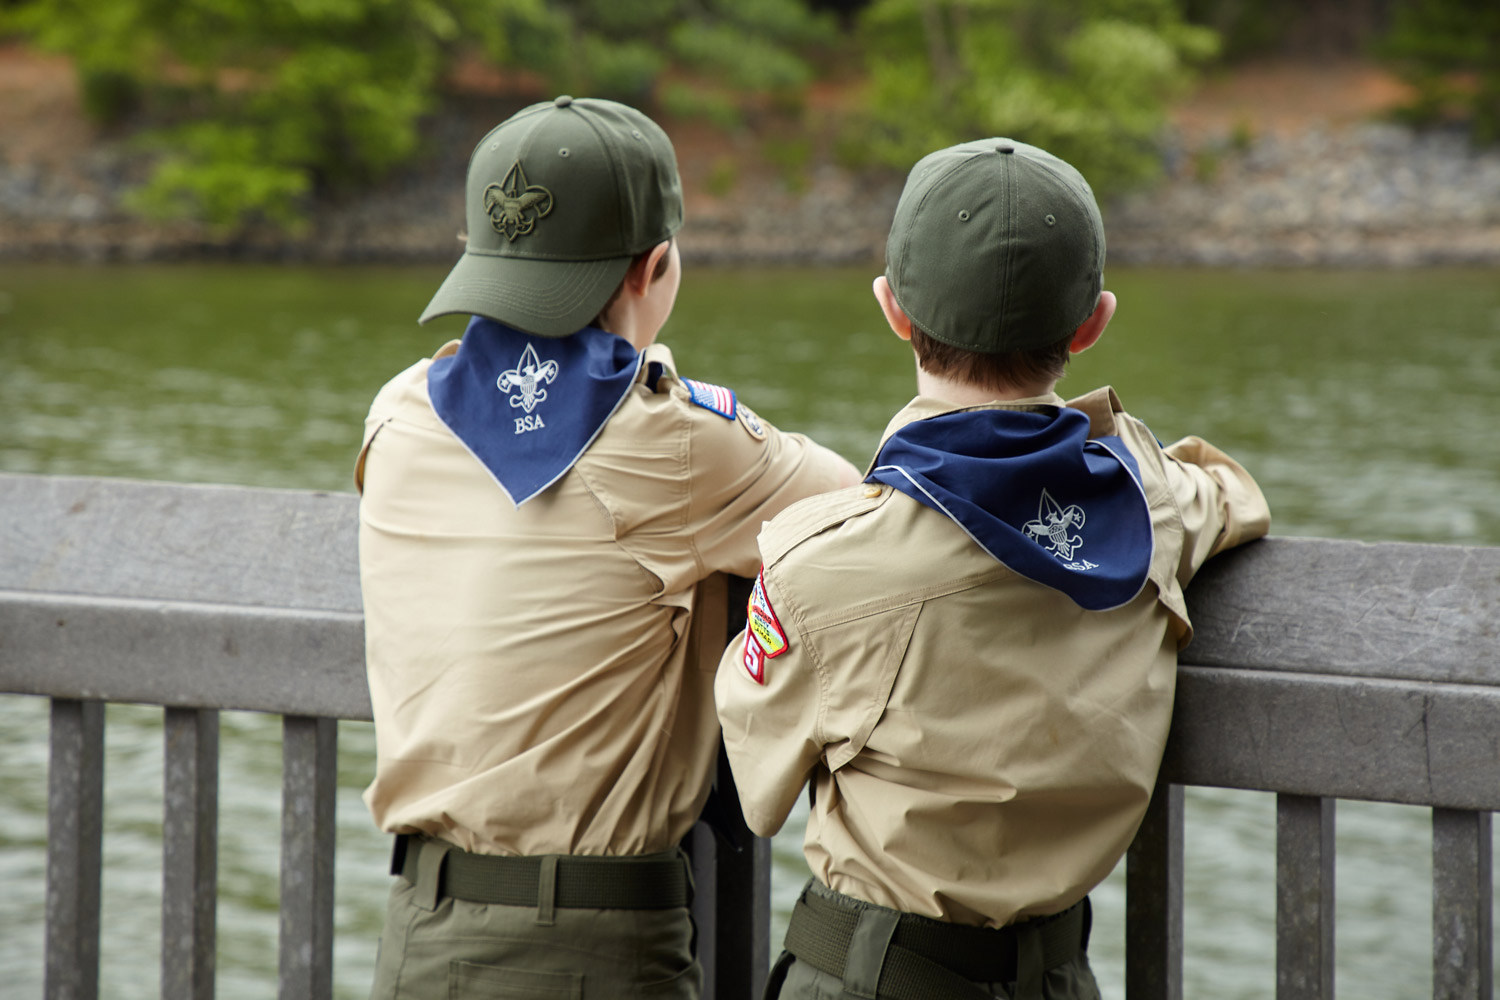 https://retailobjects.scoutshop.org/media/wysiwyg/New-to-Scouting_Scouts-at-river_Opt.jpg